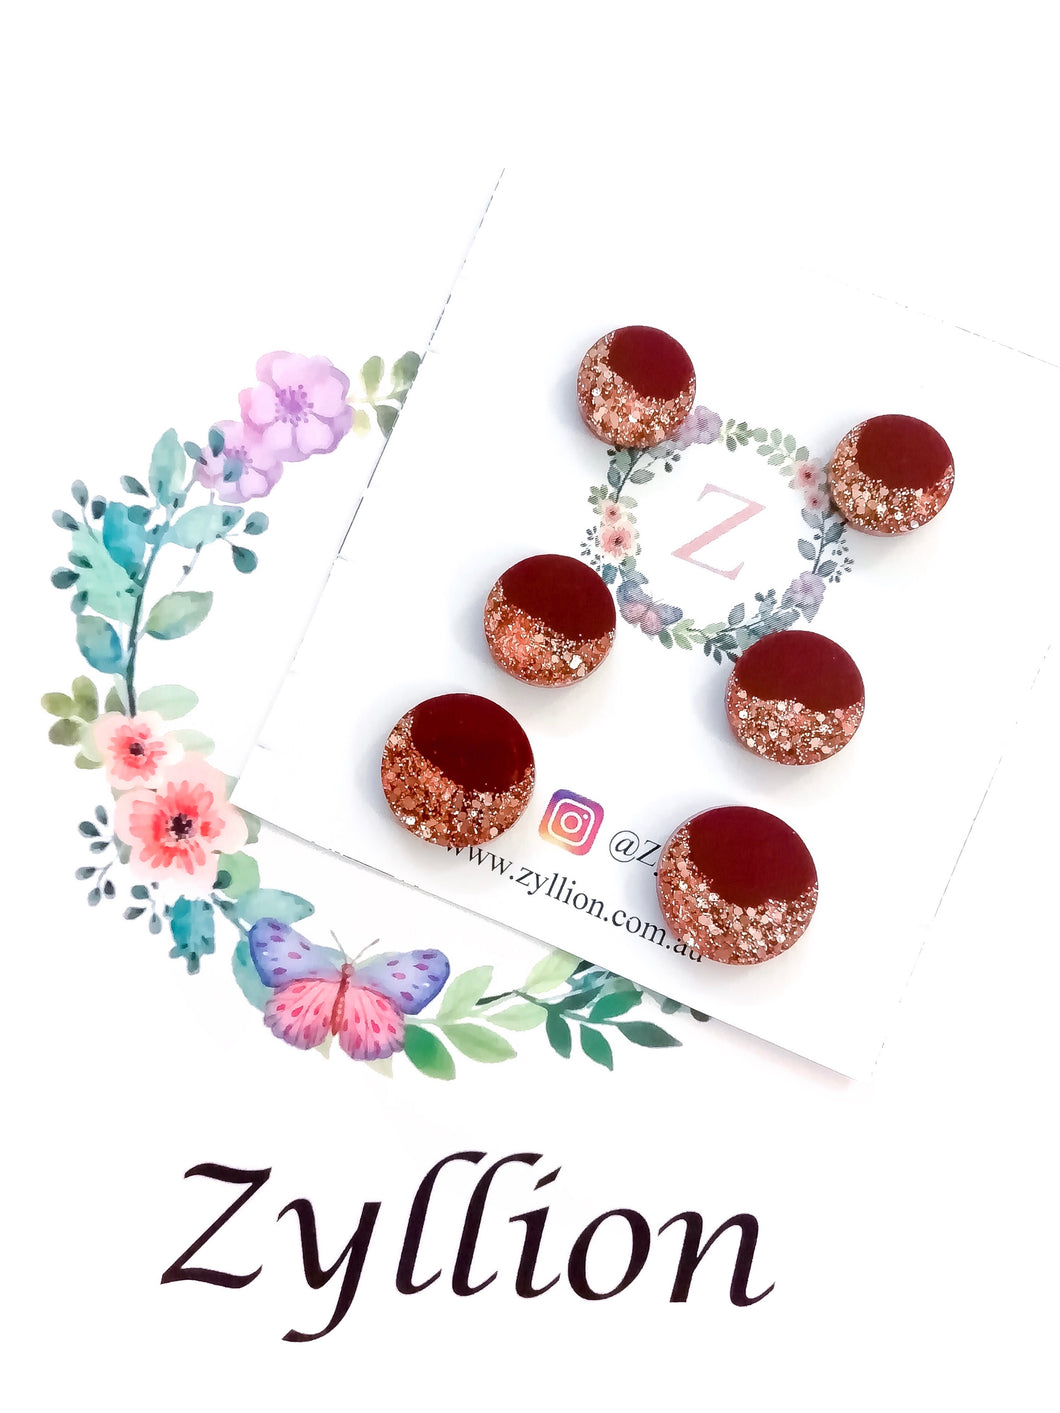 Gold & Silver Theme Round Studs Sterling Silver Earrings - Zyllion